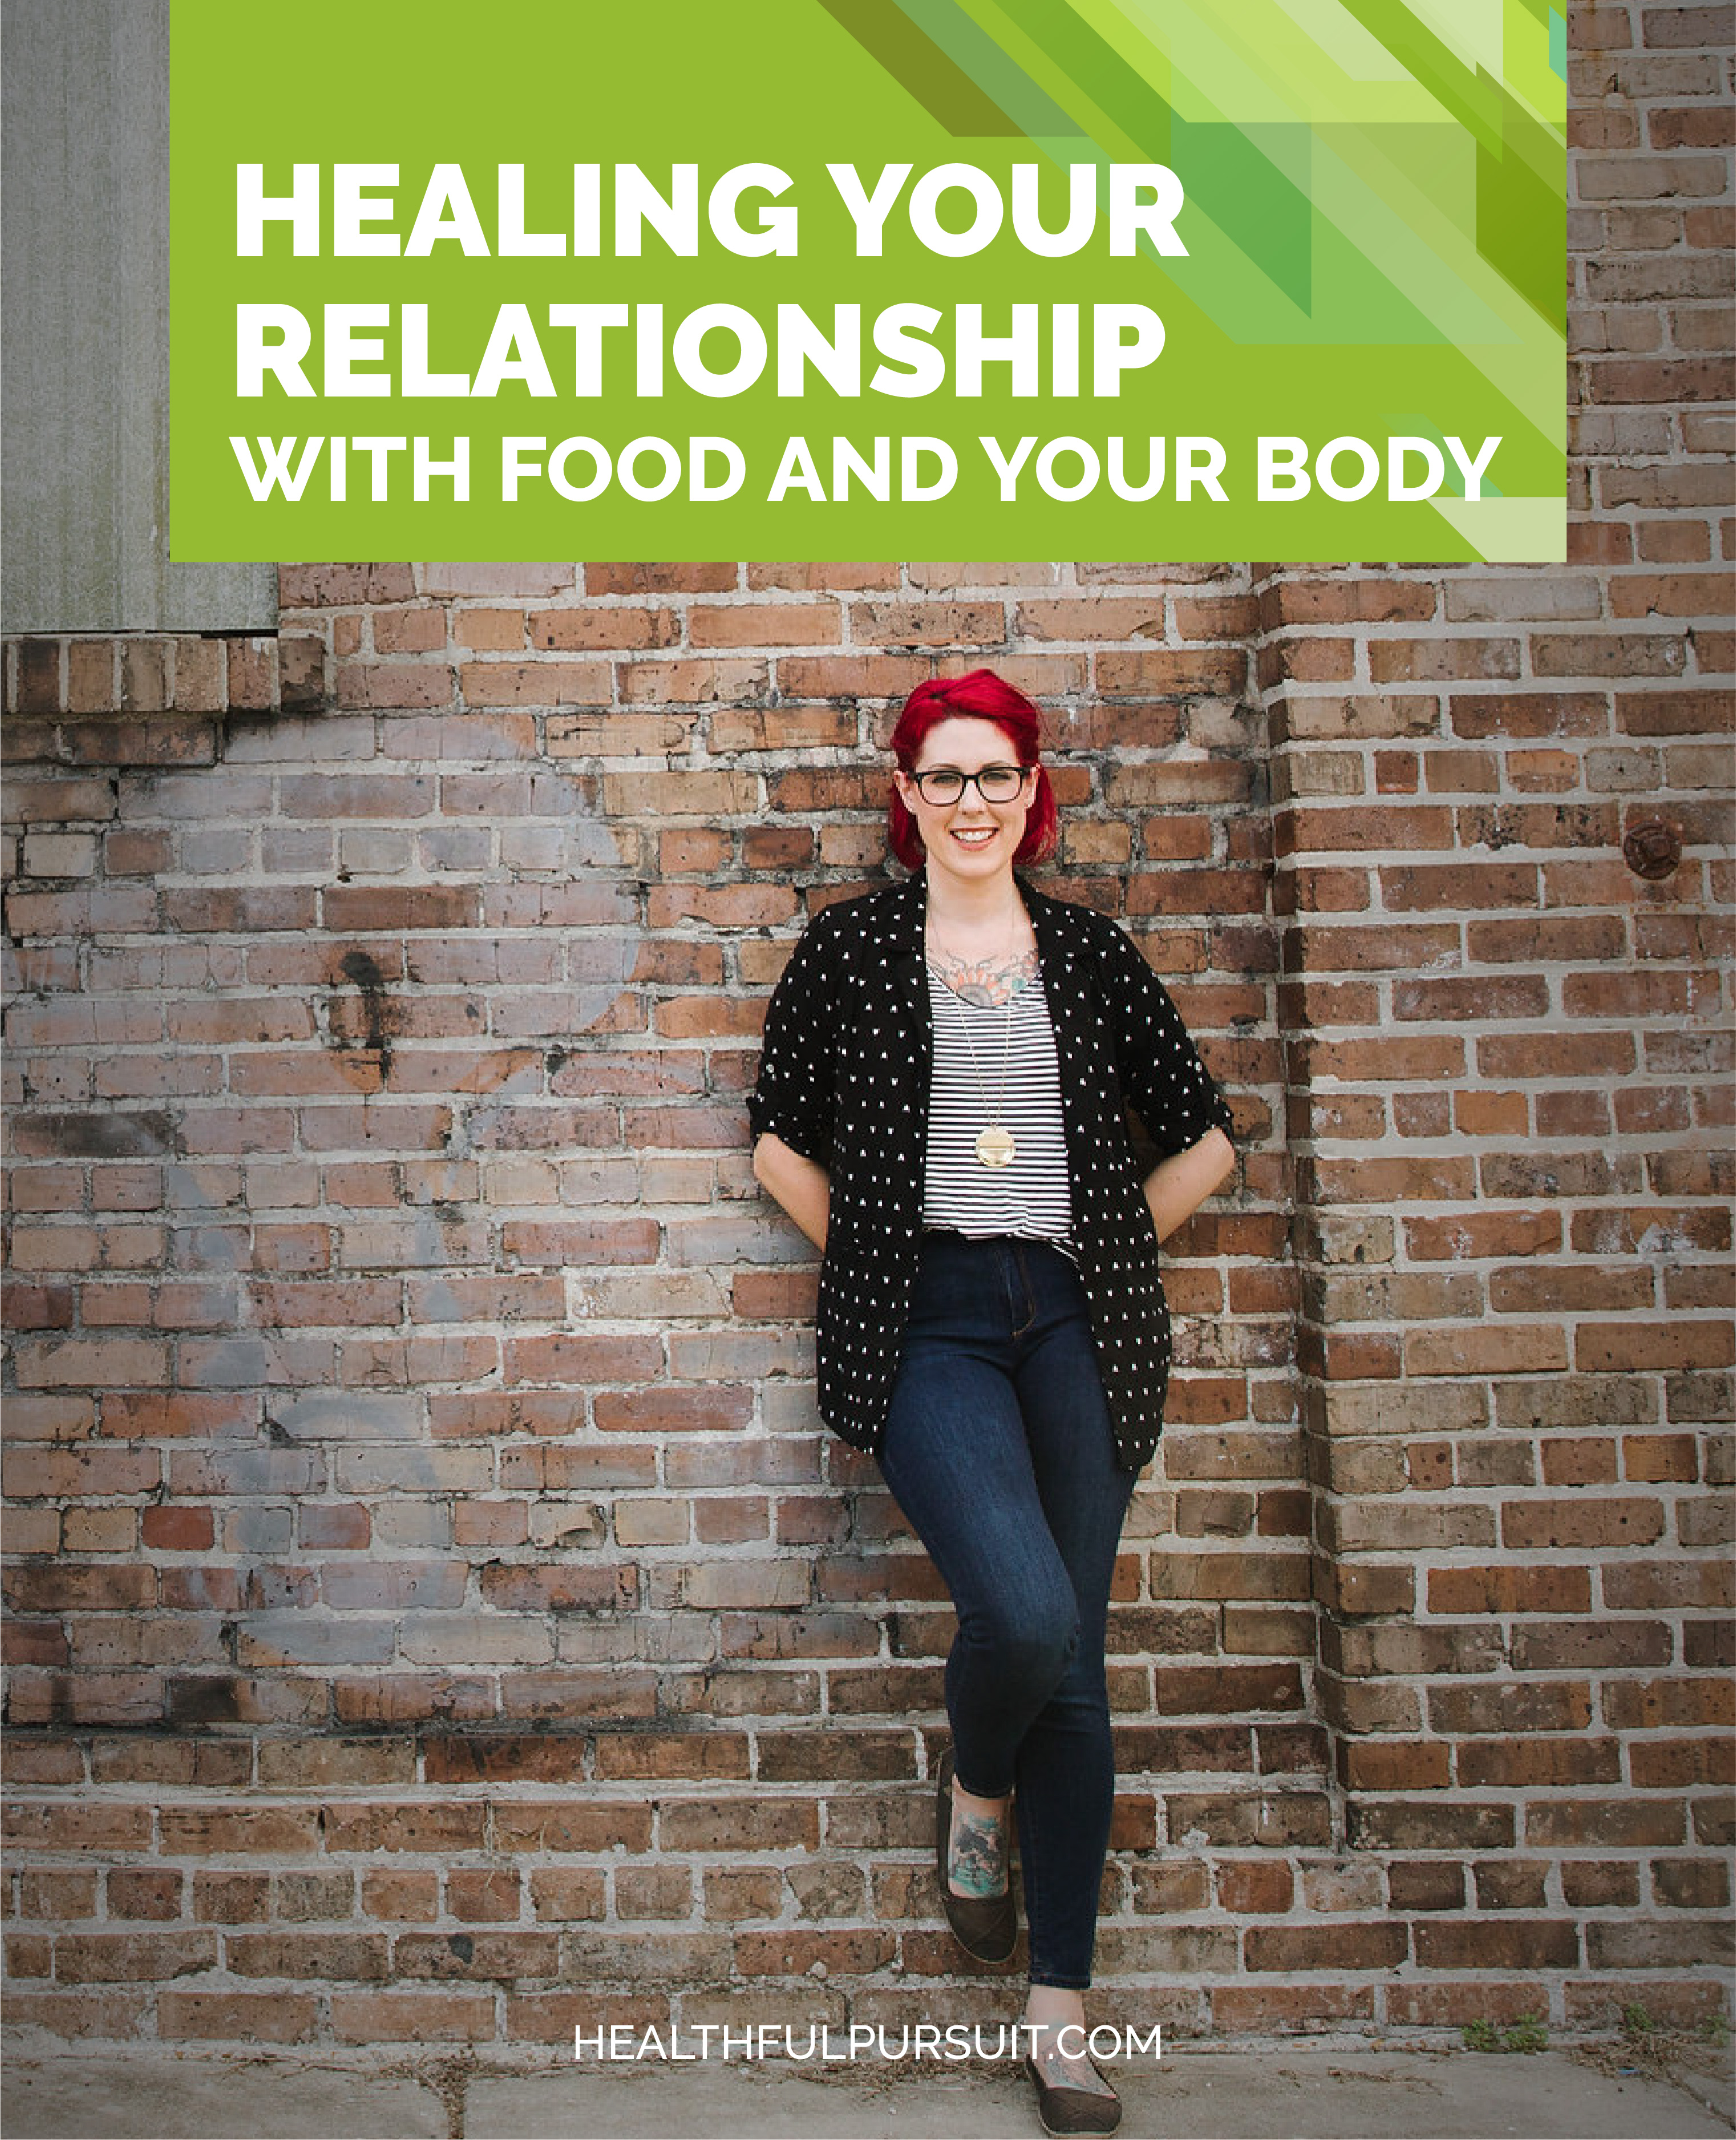 Healing Your Relationship with Food and Your Body #healthfulpursuit #fatfueled #lowcarb #keto #ketogenic #lowcarbpaleo #theketodiet